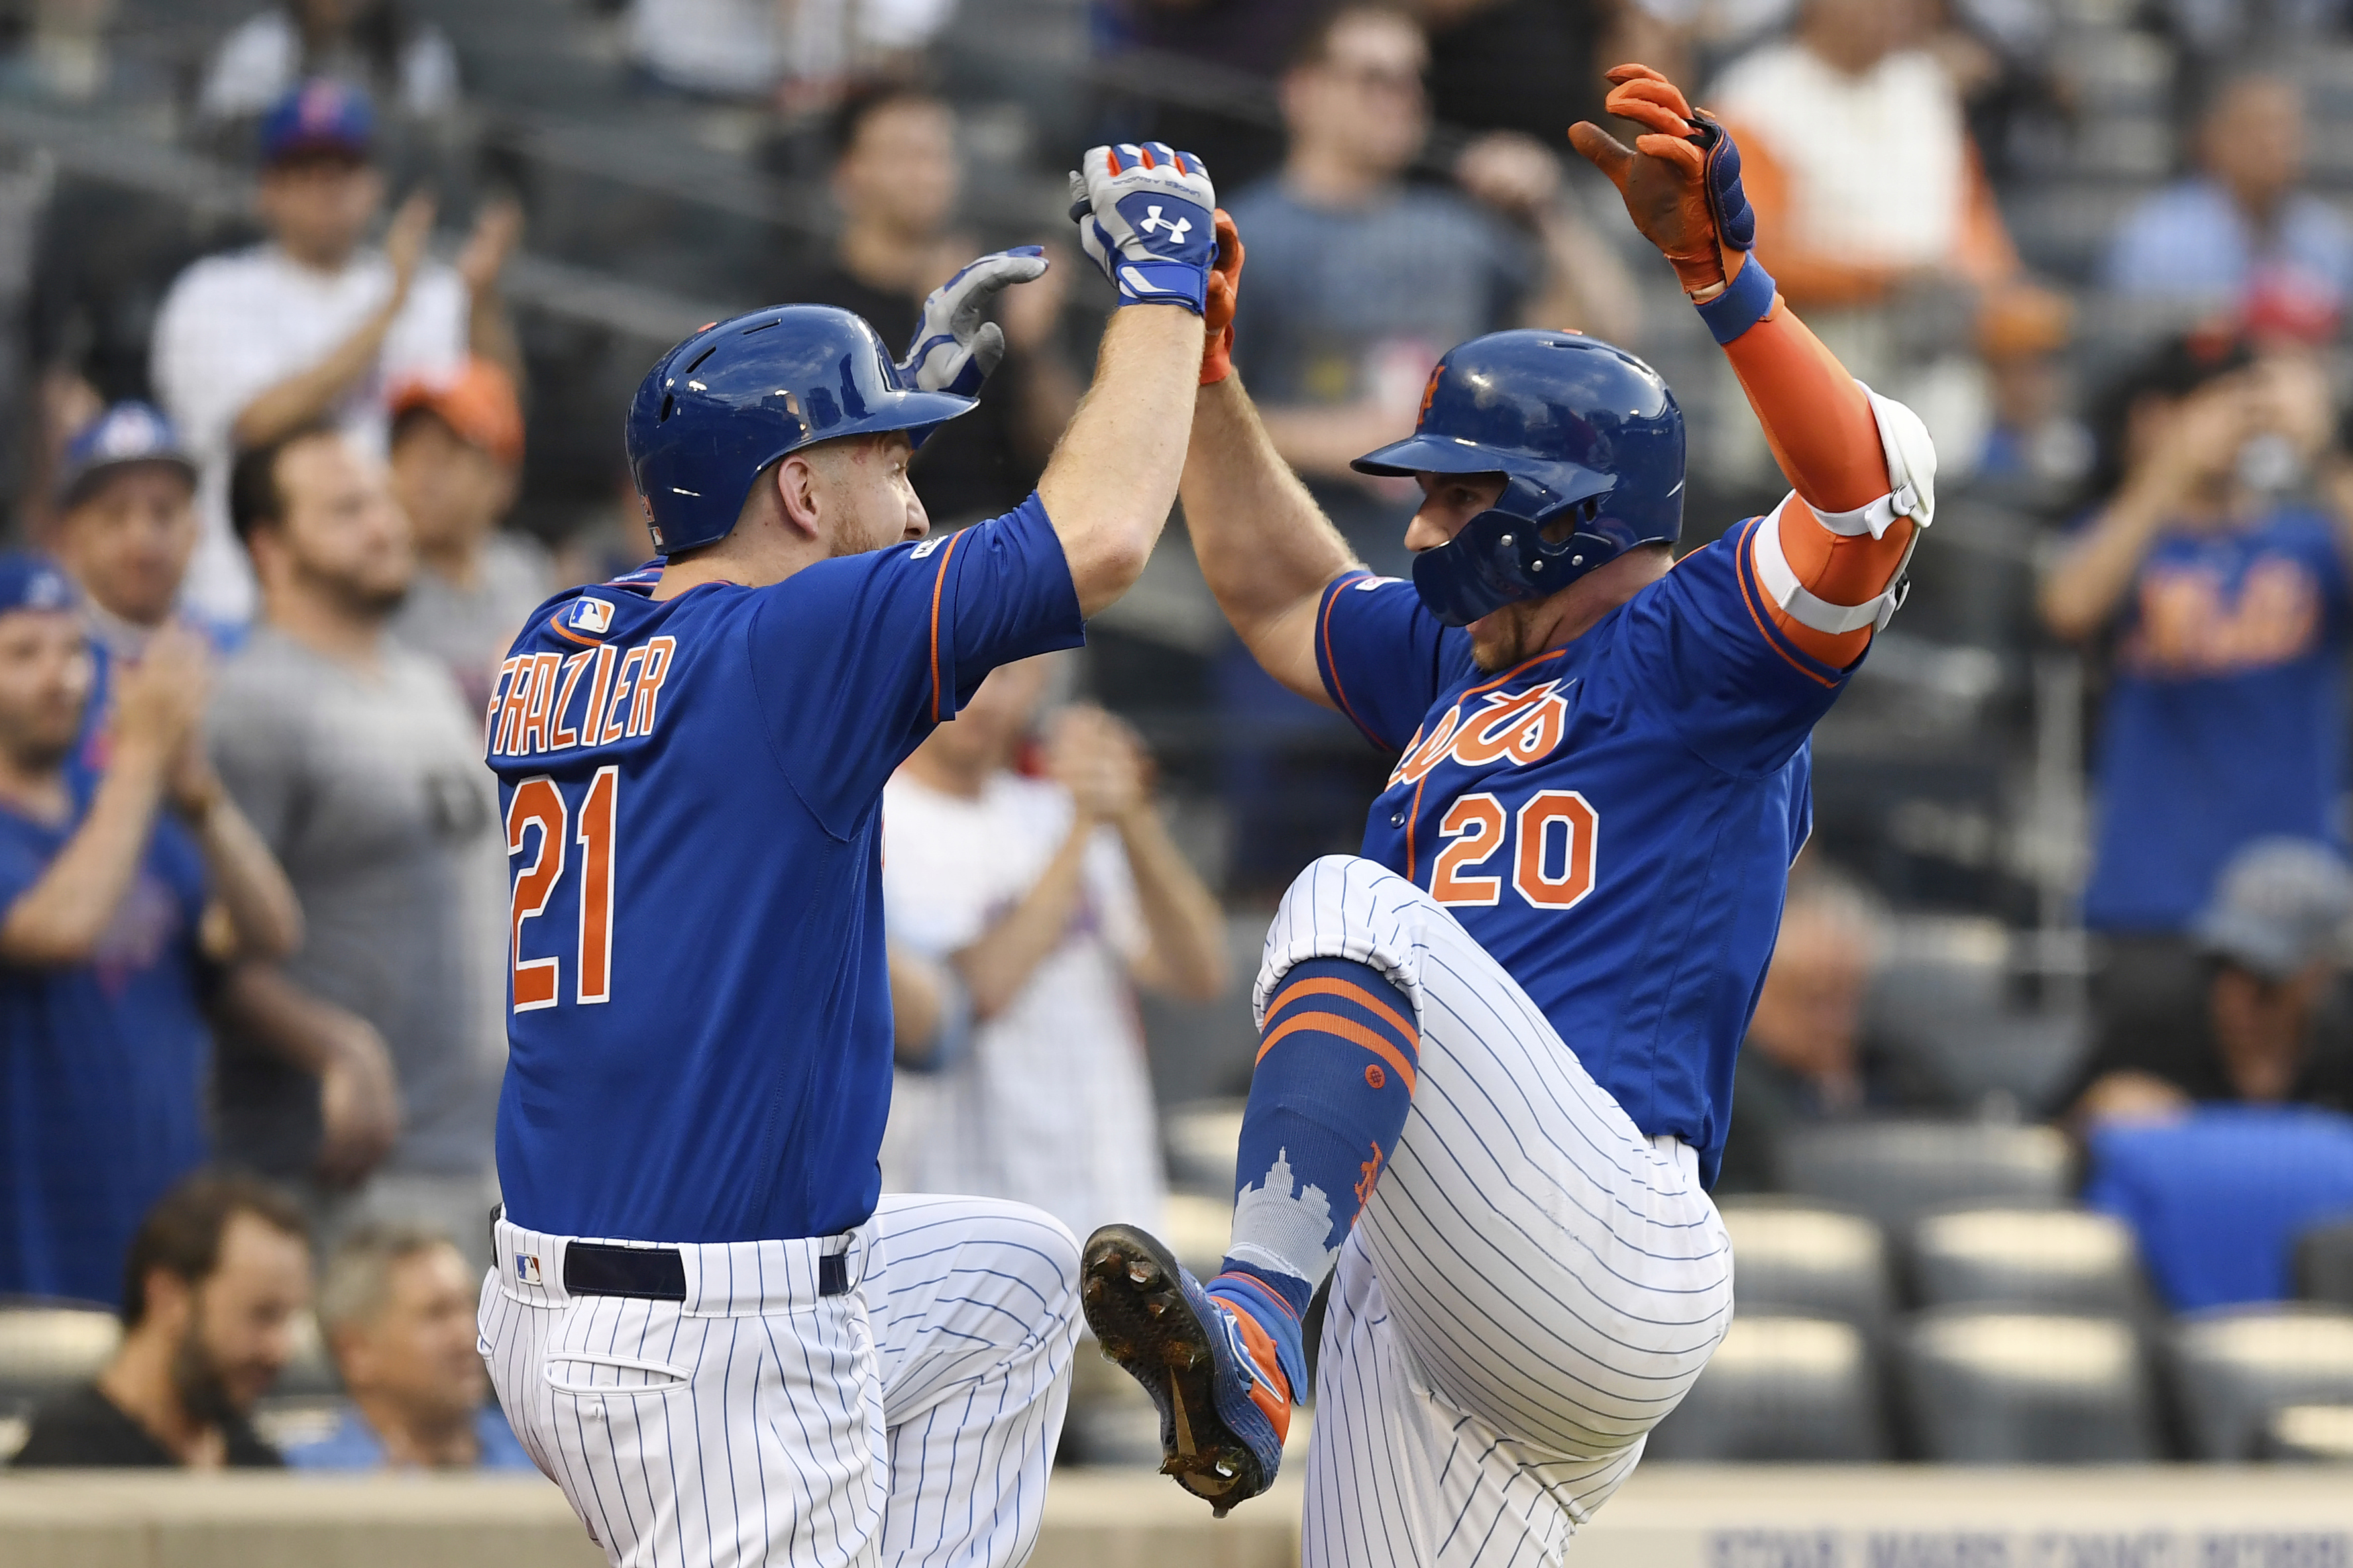 Mets snap 5-game skid with 5-3 win over Nationals